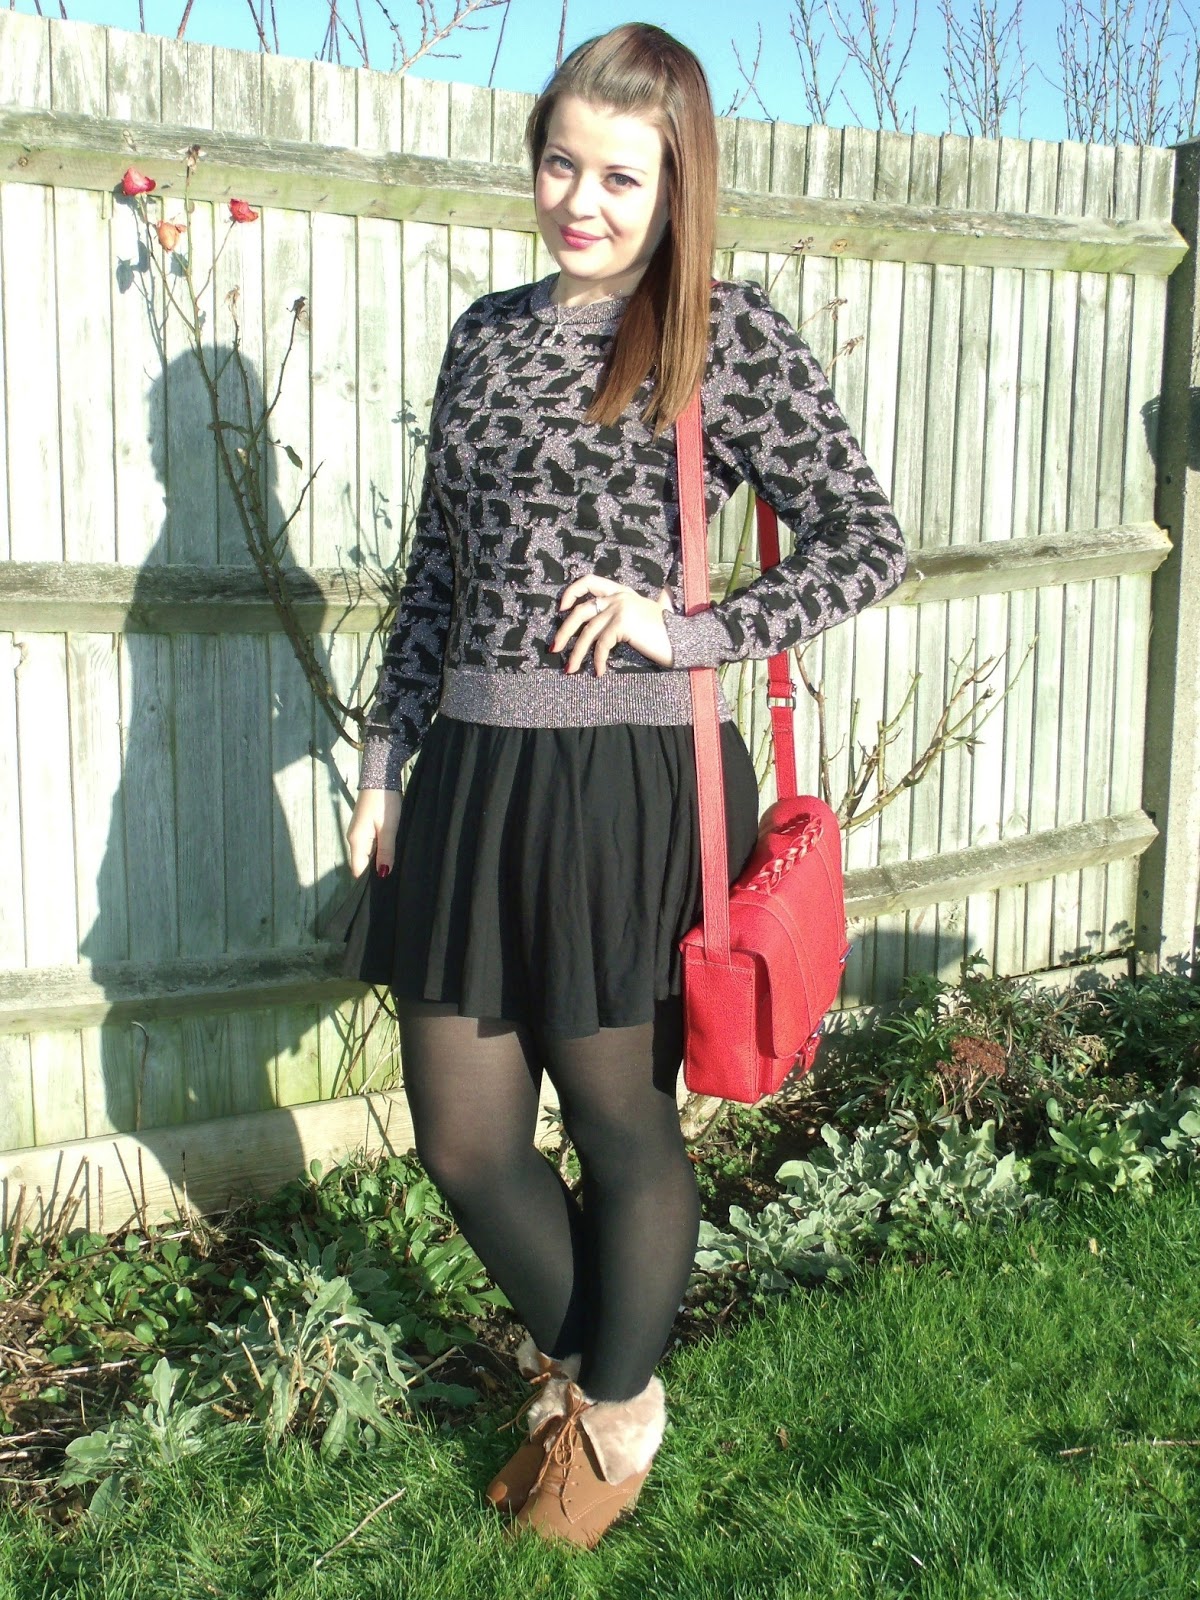 Sparkly Cat Jumper Outfit of the Day ♥ - Victoria's Vintage Blog